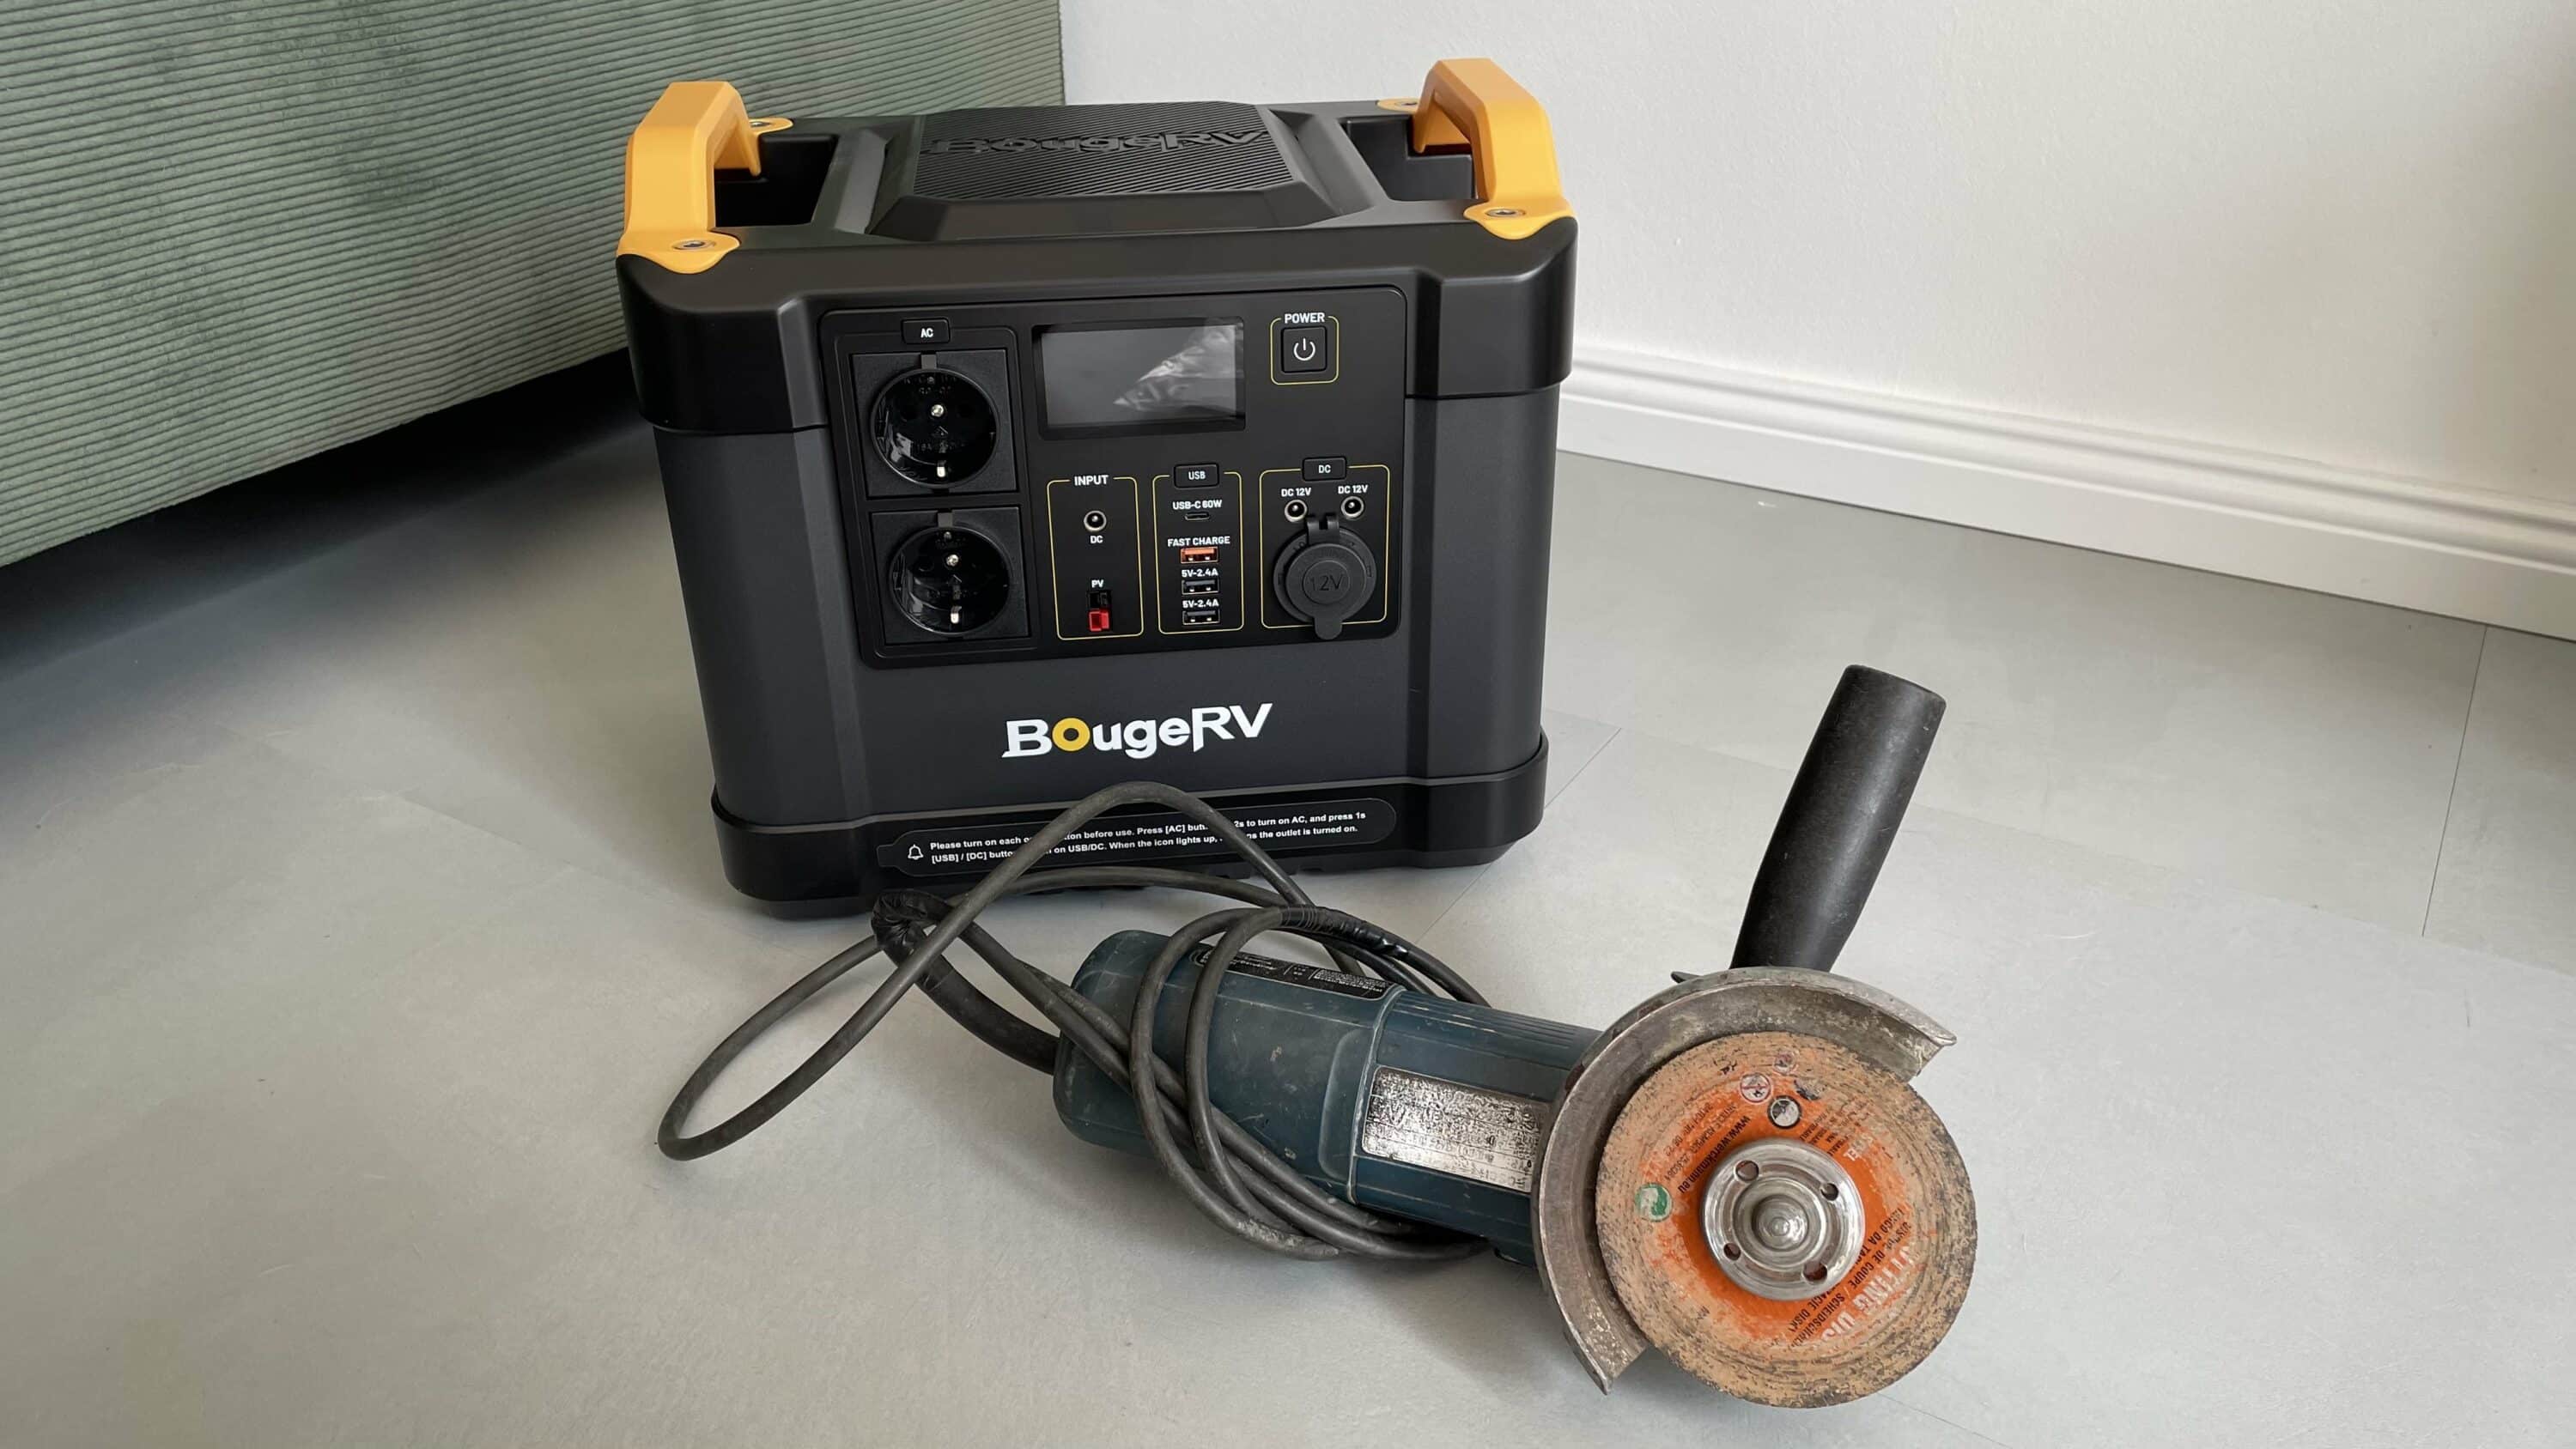 BougeRV Fort 1000 Review: Is This Your New Go-To Solar Power Station?